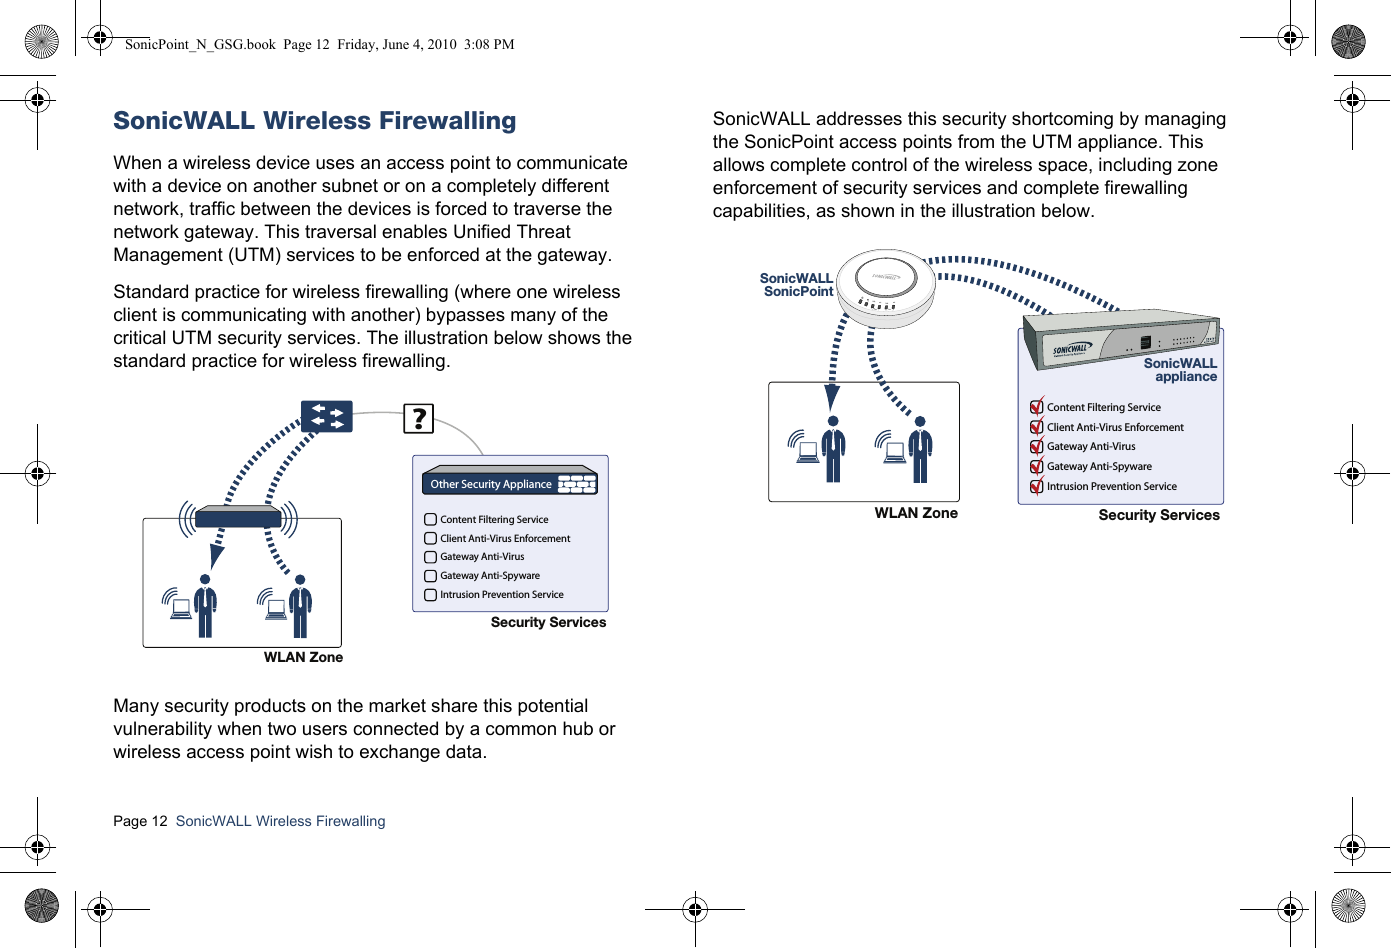 Page 12  SonicWALL Wireless Firewalling  SonicWALL Wireless FirewallingWhen a wireless device uses an access point to communicate with a device on another subnet or on a completely different network, traffic between the devices is forced to traverse the network gateway. This traversal enables Unified Threat Management (UTM) services to be enforced at the gateway.Standard practice for wireless firewalling (where one wireless client is communicating with another) bypasses many of the critical UTM security services. The illustration below shows the standard practice for wireless firewalling. Many security products on the market share this potential vulnerability when two users connected by a common hub or wireless access point wish to exchange data.SonicWALL addresses this security shortcoming by managing the SonicPoint access points from the UTM appliance. This allows complete control of the wireless space, including zone enforcement of security services and complete firewalling capabilities, as shown in the illustration below.WLAN ZoneSecurity Services?Content Filtering ServiceClient Anti-Virus EnforcementGateway Anti-VirusGateway Anti-SpywareIntrusion Prevention ServiceOther Security ApplianceWLAN Zone Security ServicesSonicWALLapplianceSonicWALLSonicPointContent Filtering ServiceClient Anti-Virus EnforcementGateway Anti-VirusGateway Anti-SpywareIntrusion Prevention ServicelinkwlanlanactlinkactSonicPoint_N_GSG.book  Page 12  Friday, June 4, 2010  3:08 PM